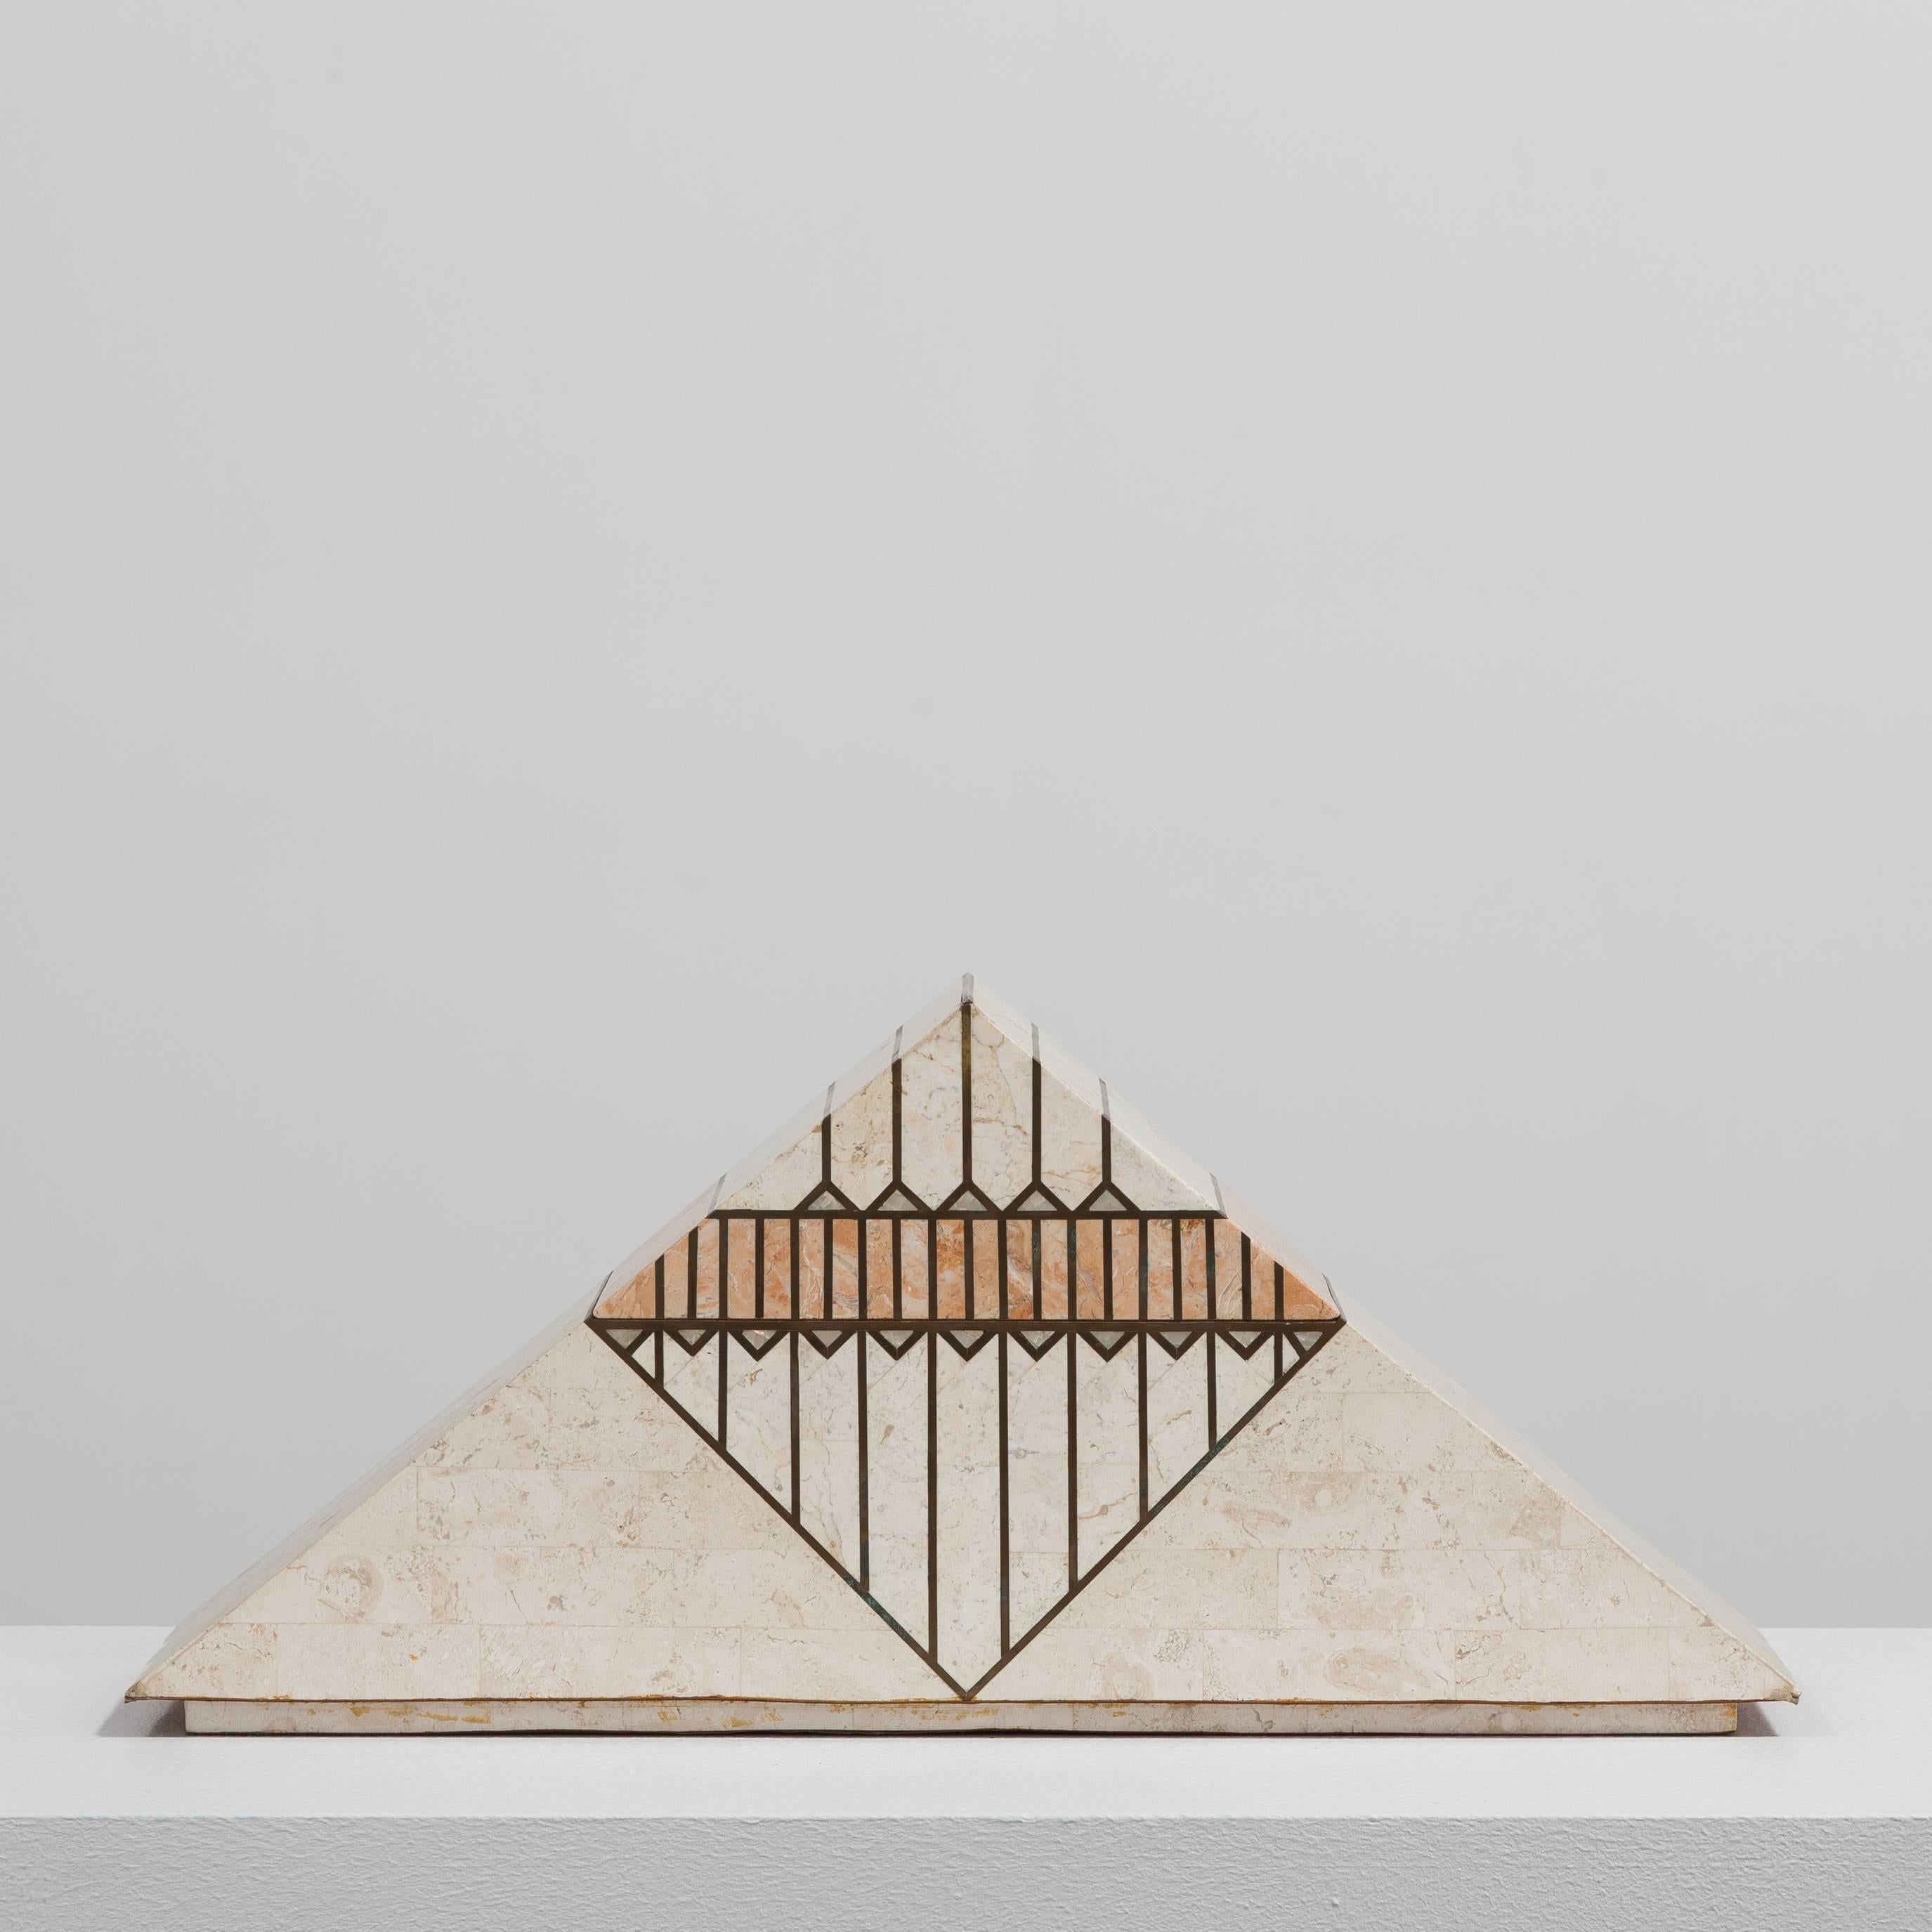 A Robert Marcius for Casa Bique designed tessellated stone pyramid box, 1980s. Prices include 20% VAT which is removed for items shipped outside the EU.